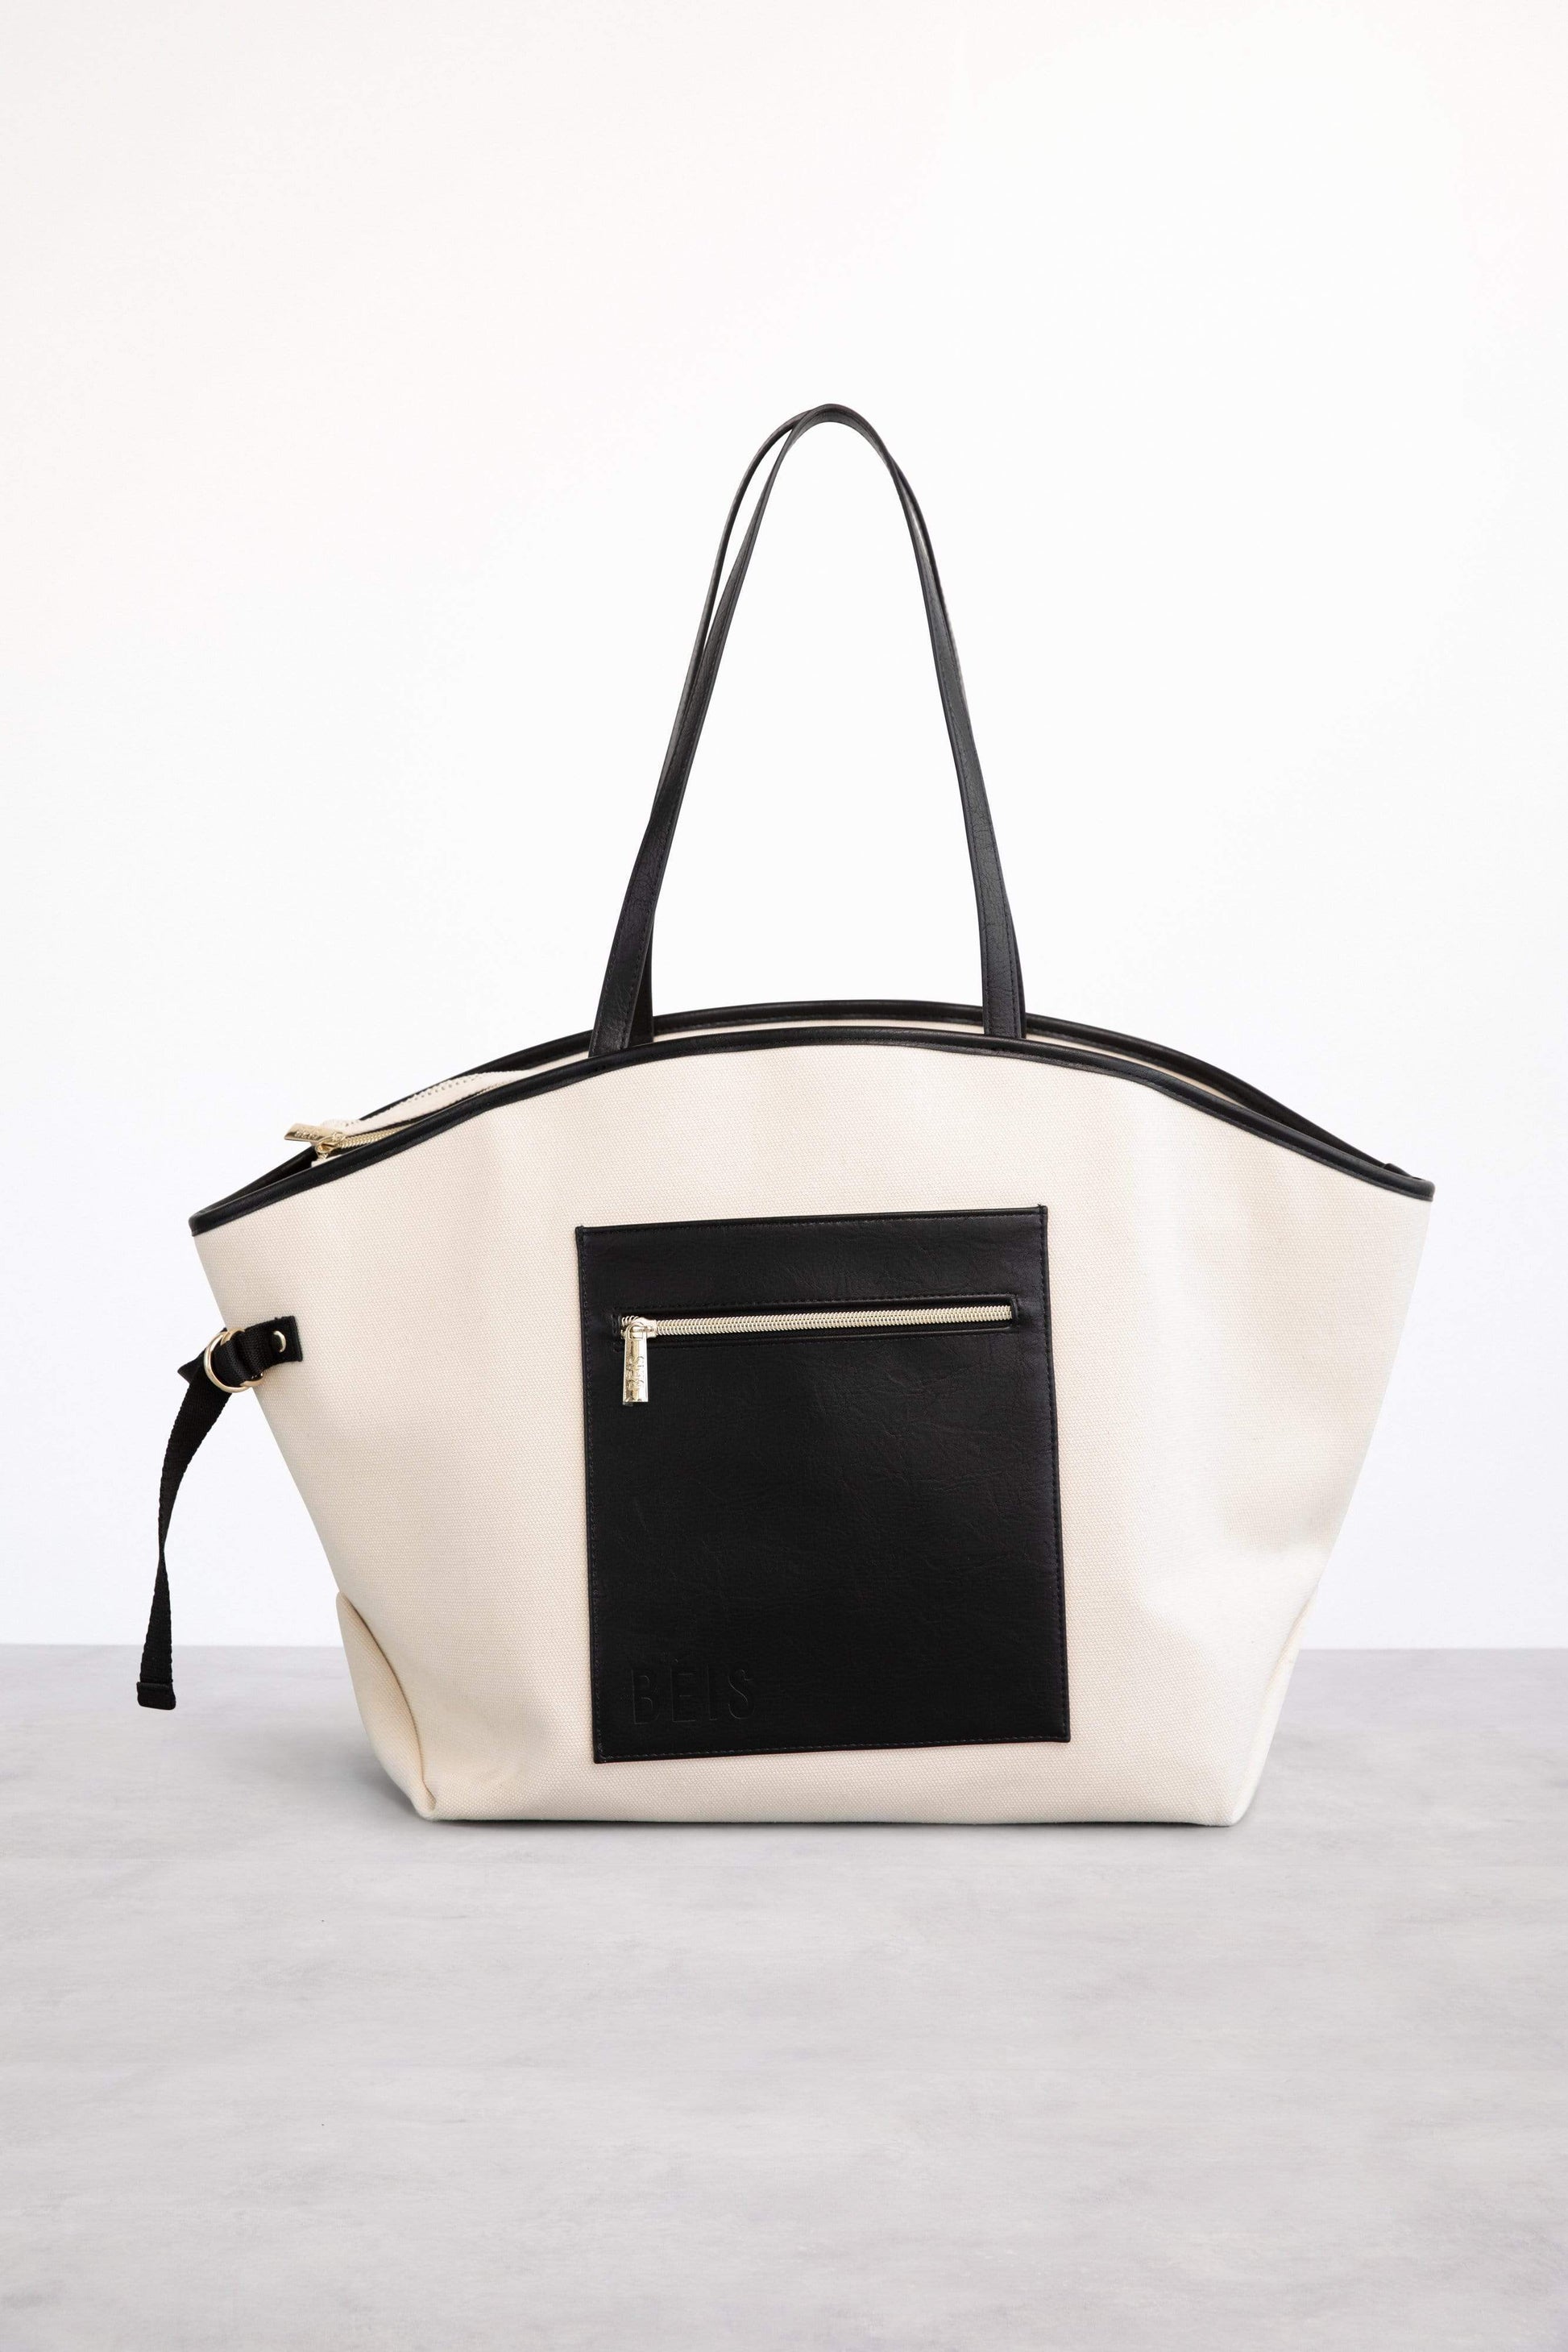 Keanoo Aesthetic Canvas Tote Bag for Women, Cute Tote Bags with Zipper Big  Canvas Shoulder Bag for Shopping Beach Gift